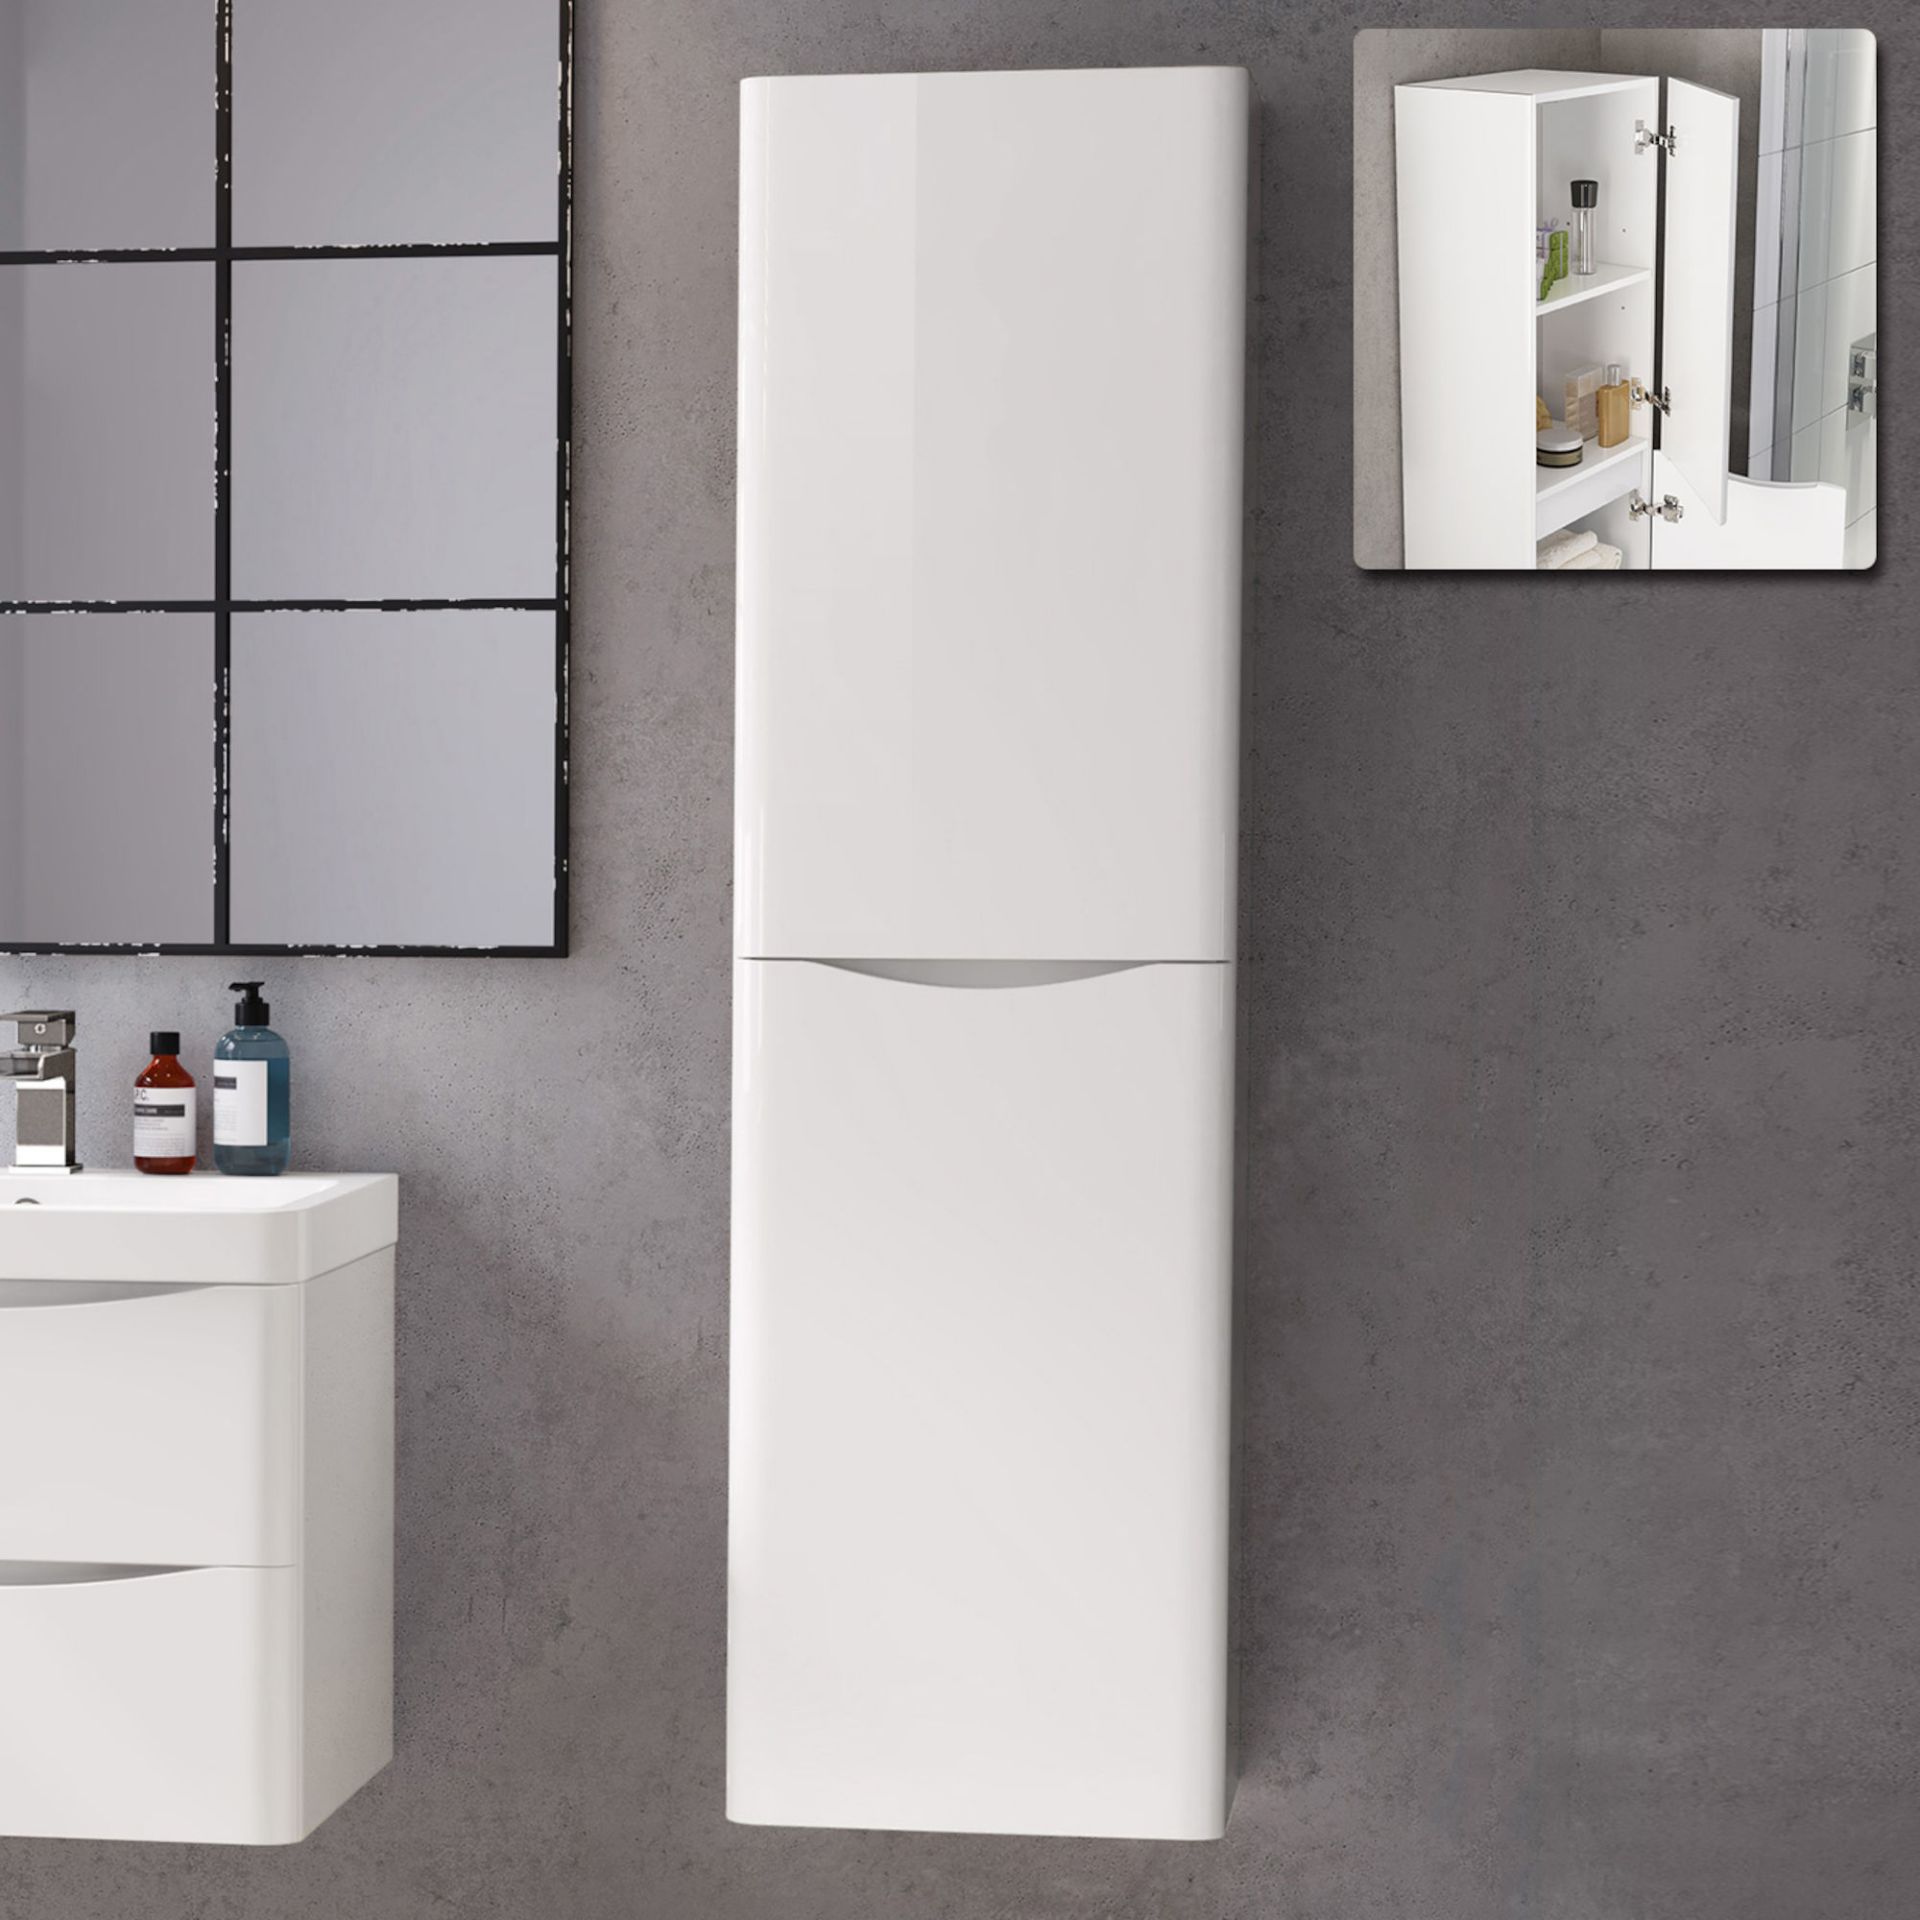 (SP52) 1400mm Austin II Gloss White Tall Wall Hung Storage Cabinet - Right Hand. RRP £299.99.